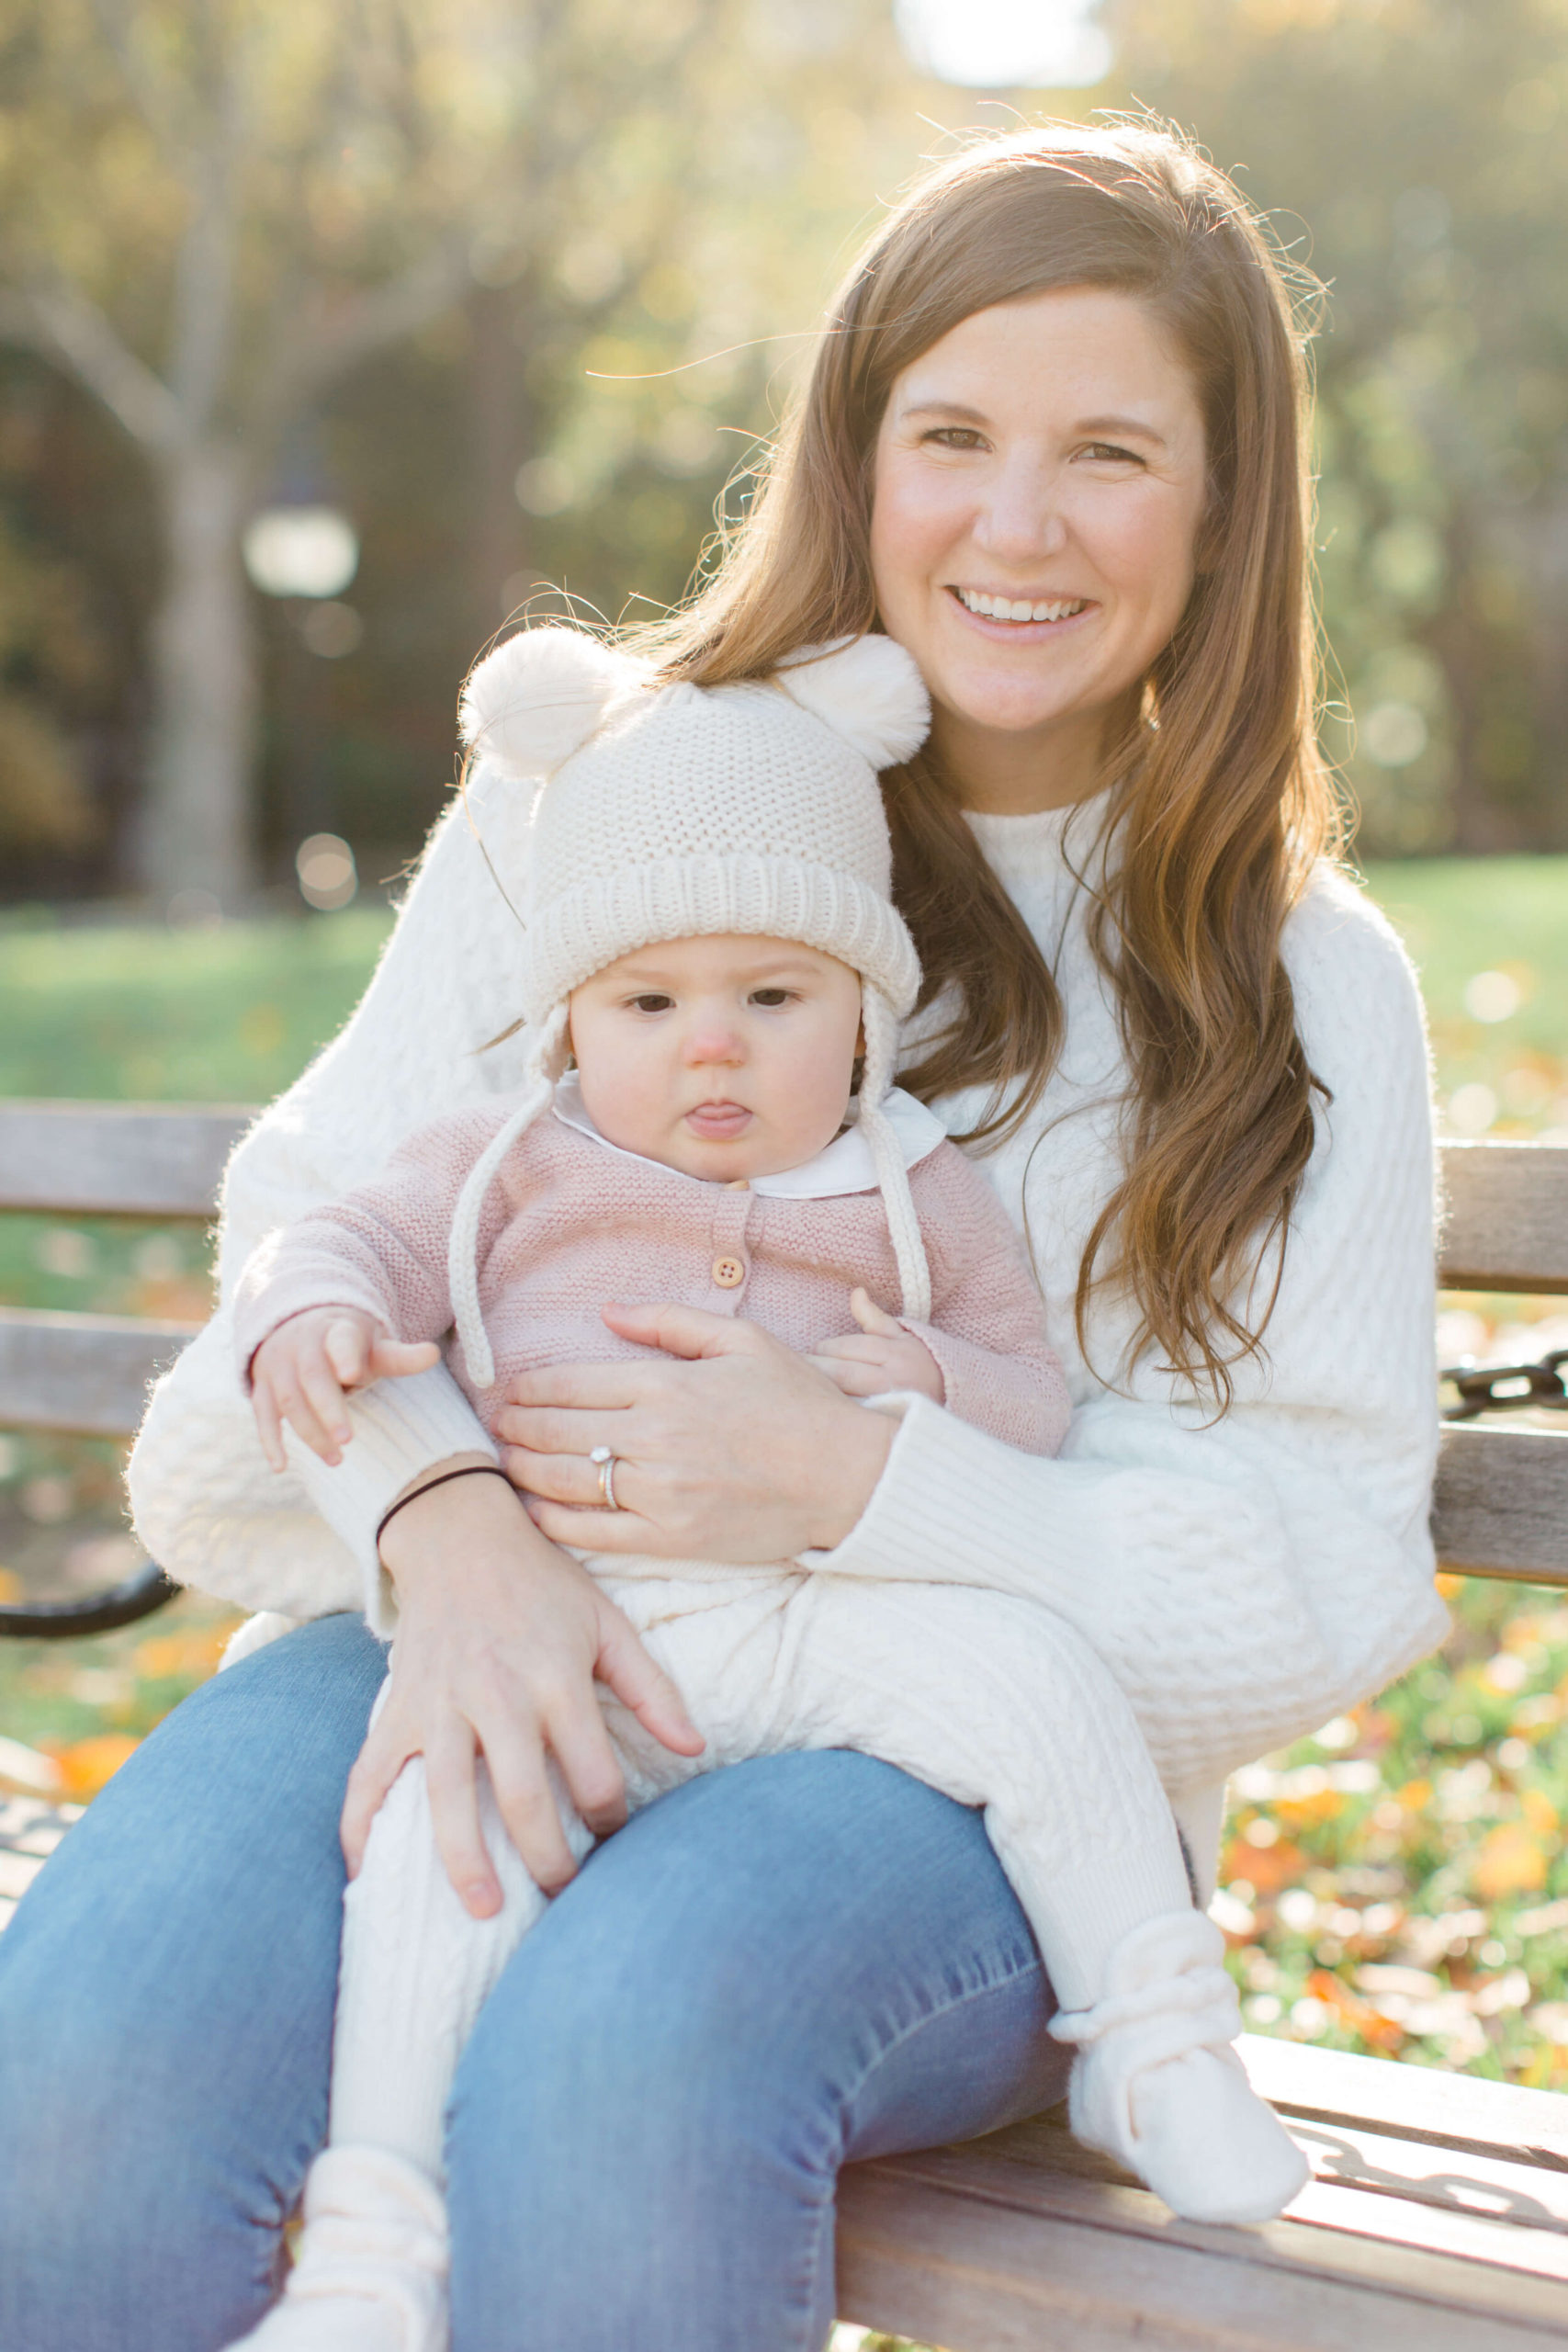 Family photography in Washington Square Park pictured by top NYC family photographer, Jacqueline Clair